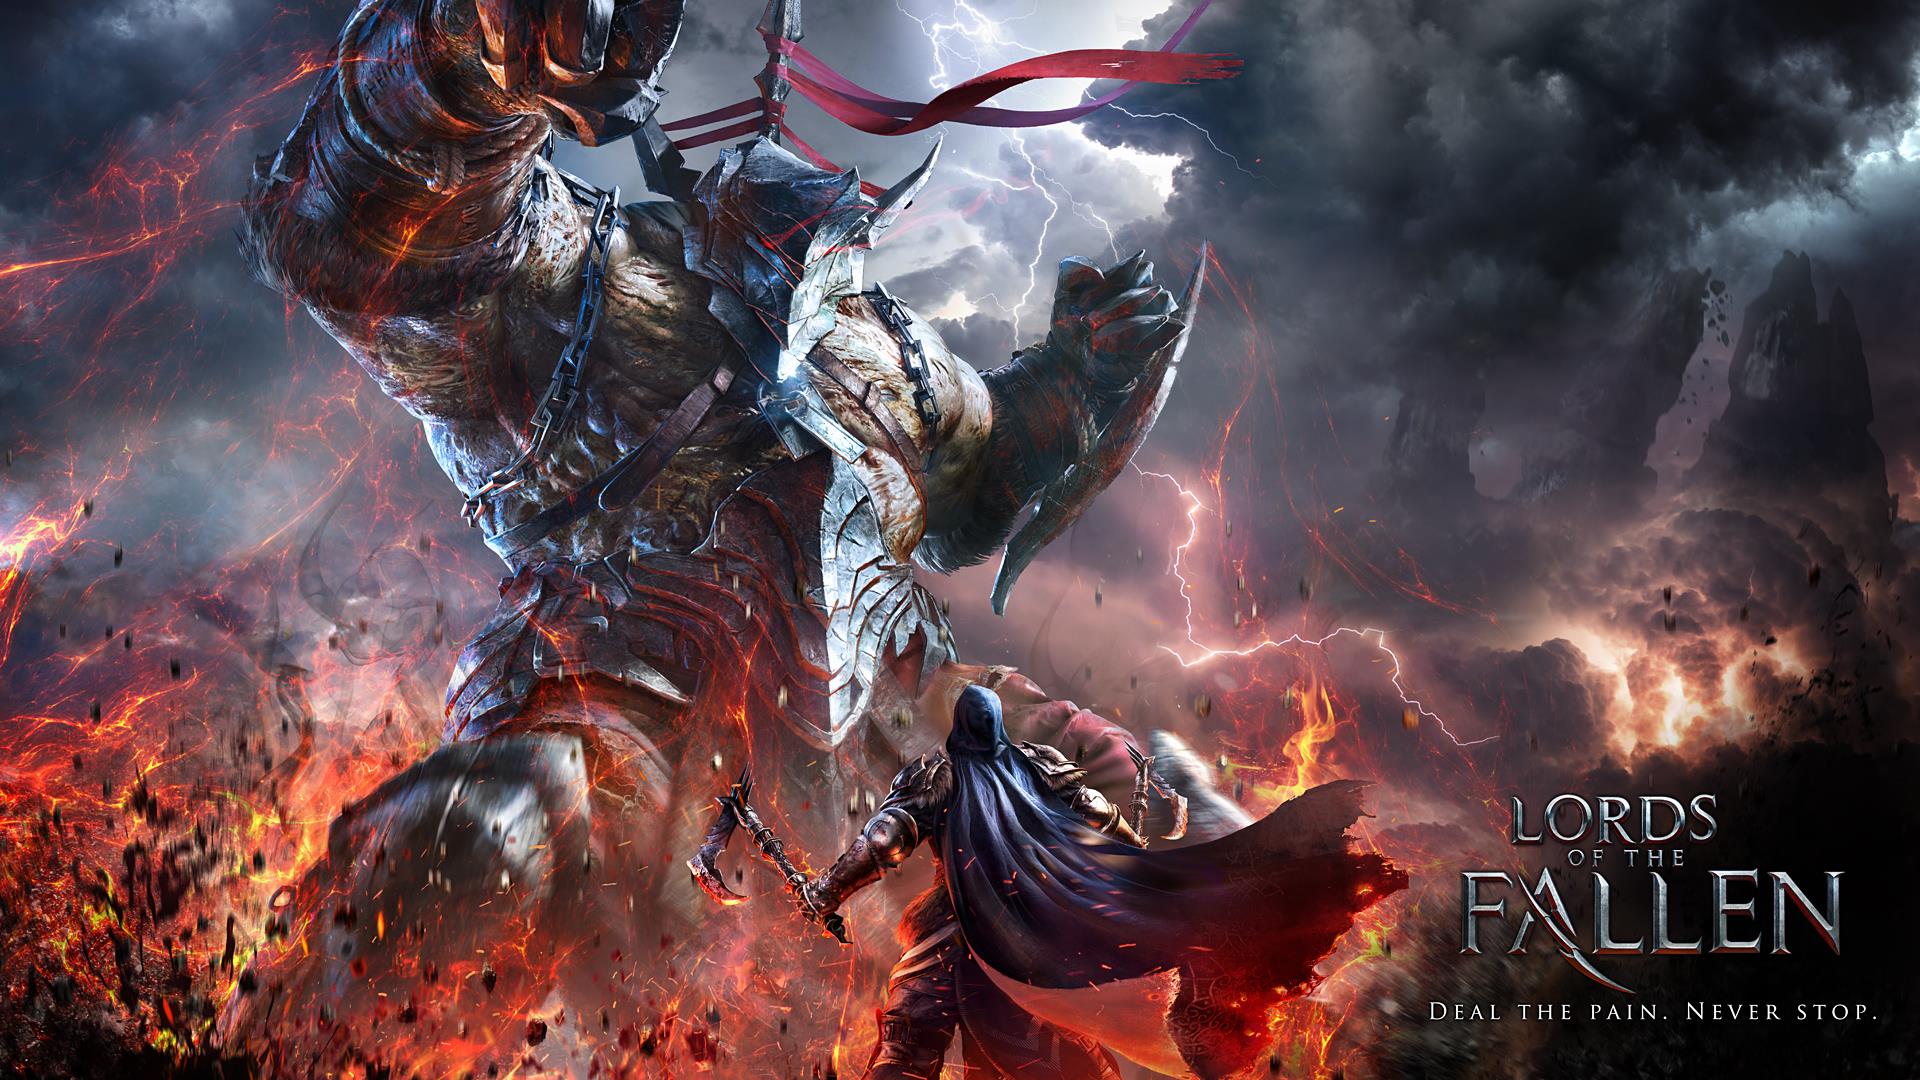 Lords of the Fallen Gets a New Gameplay Video Showing New Monsters and